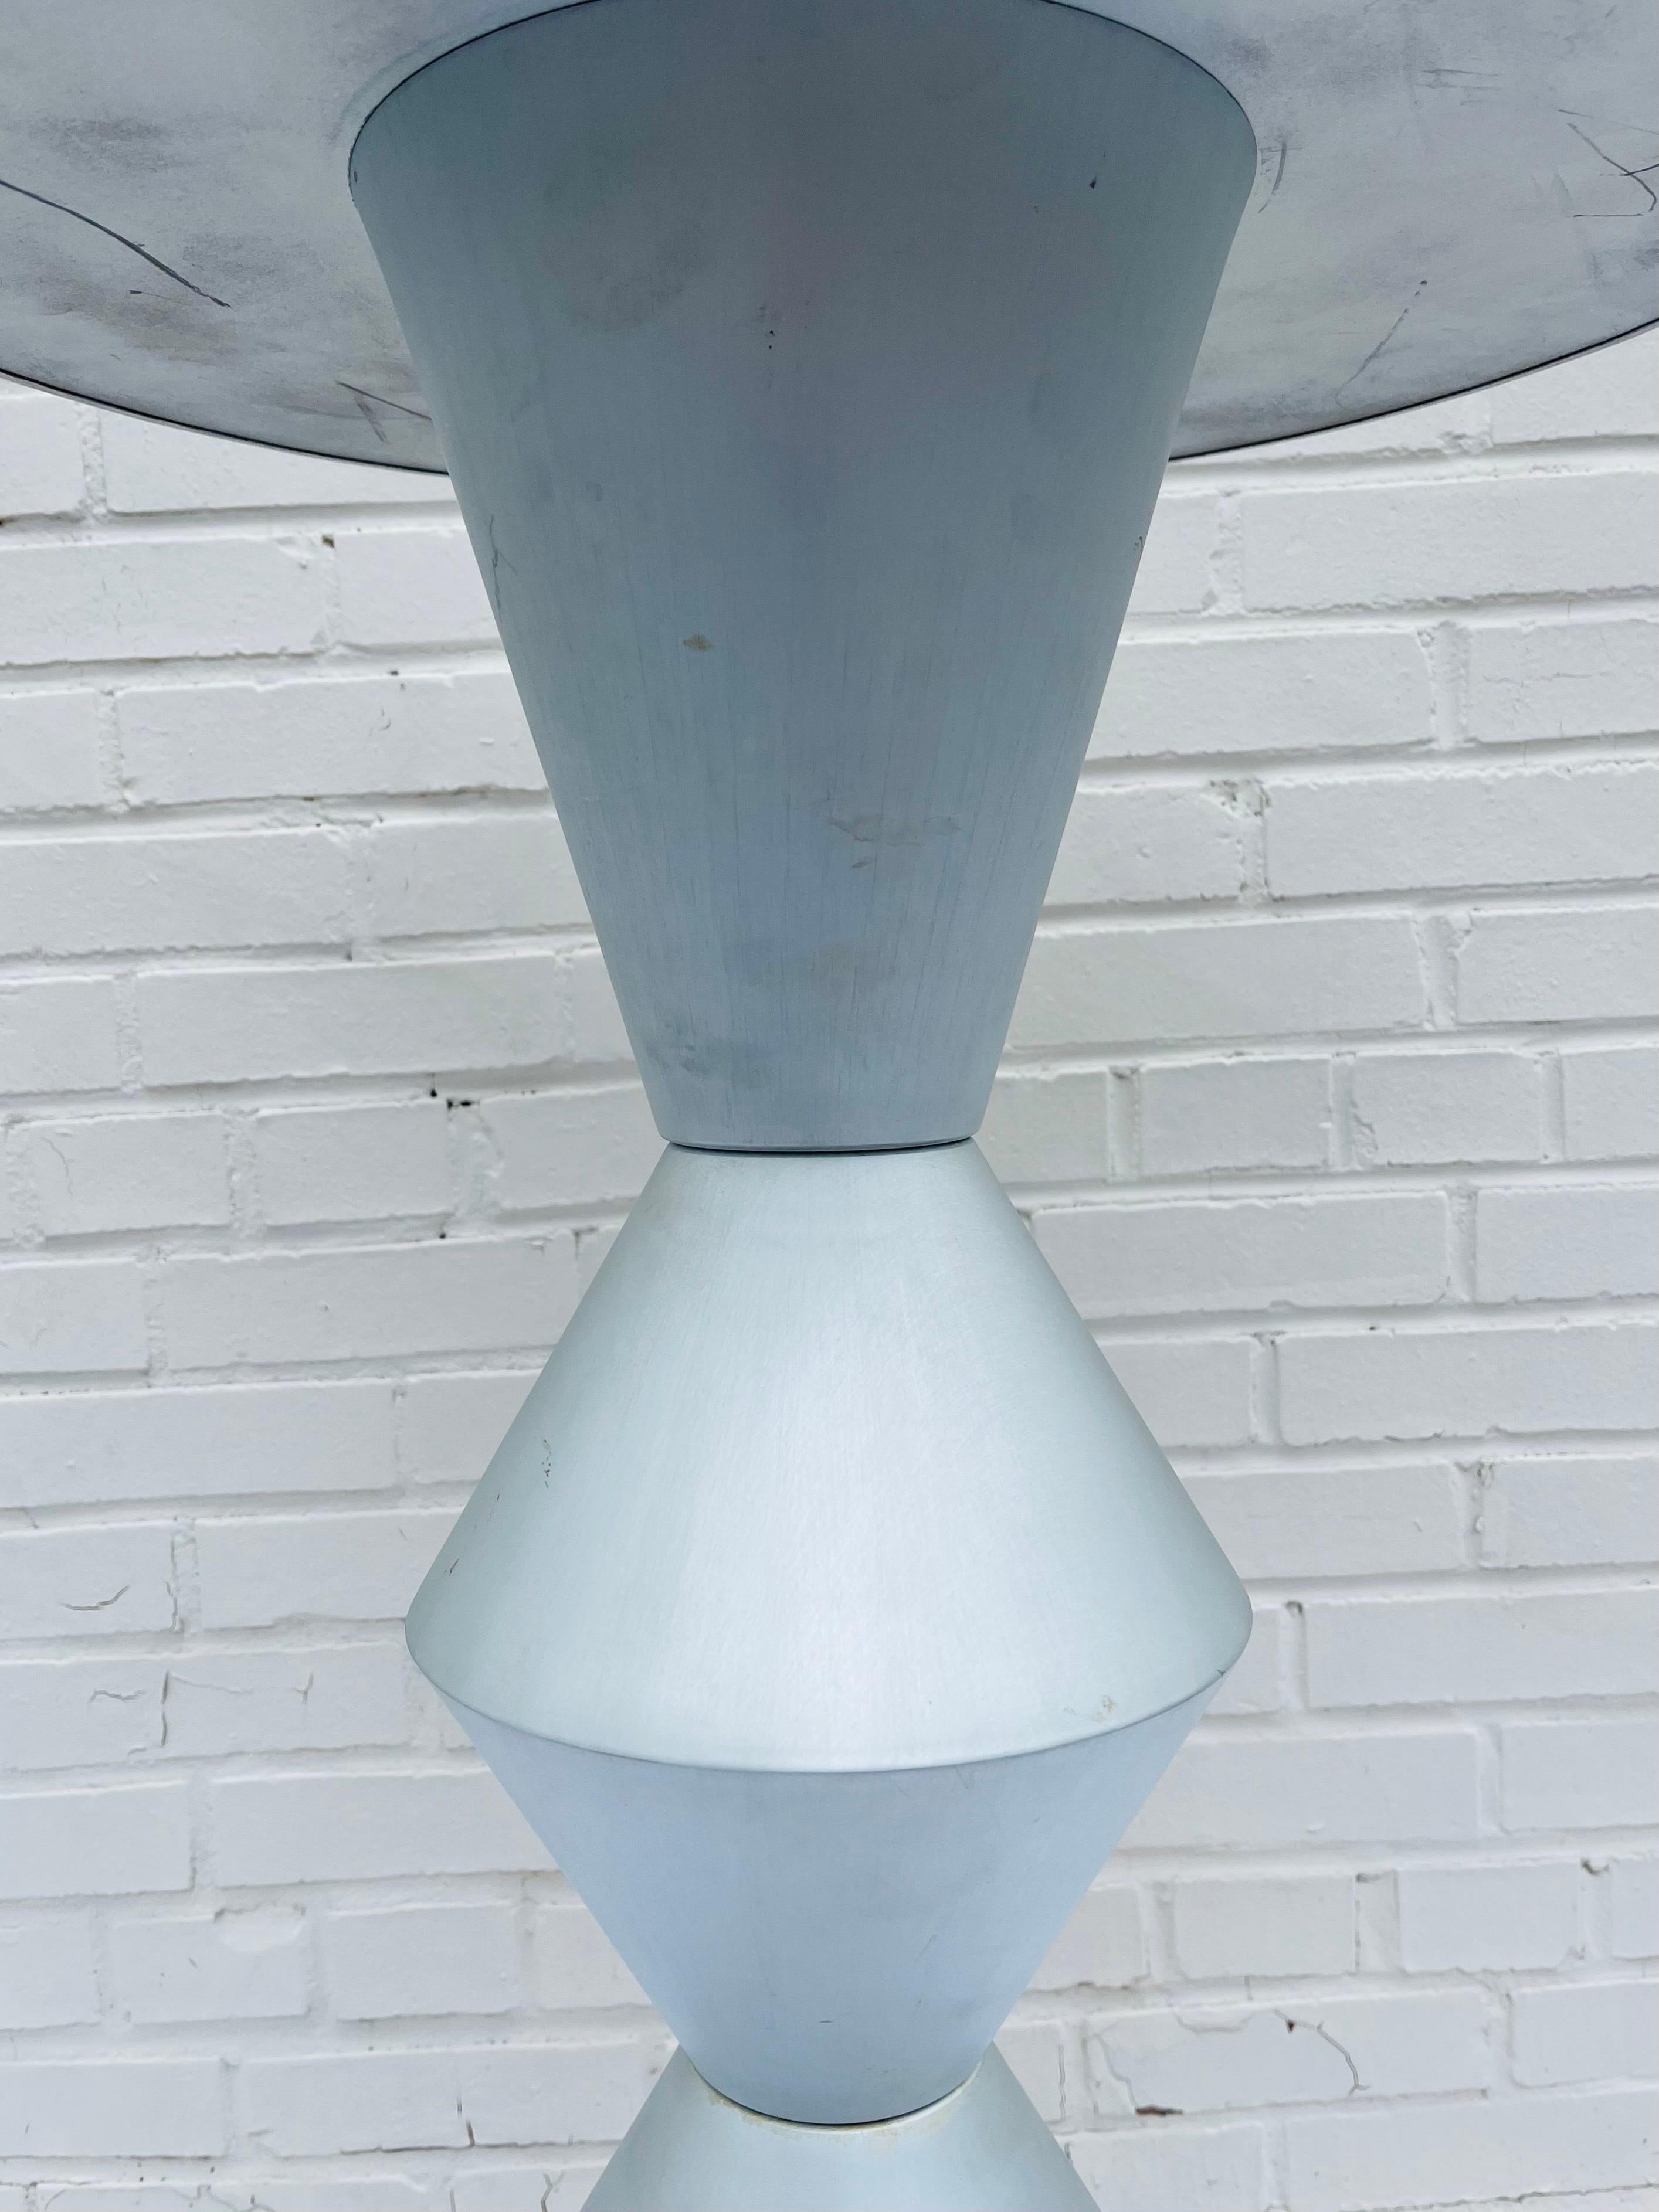 Vintage Postmodern Vibe Aluminum and Stainless Sculptural Brancusi Style Table For Sale 2